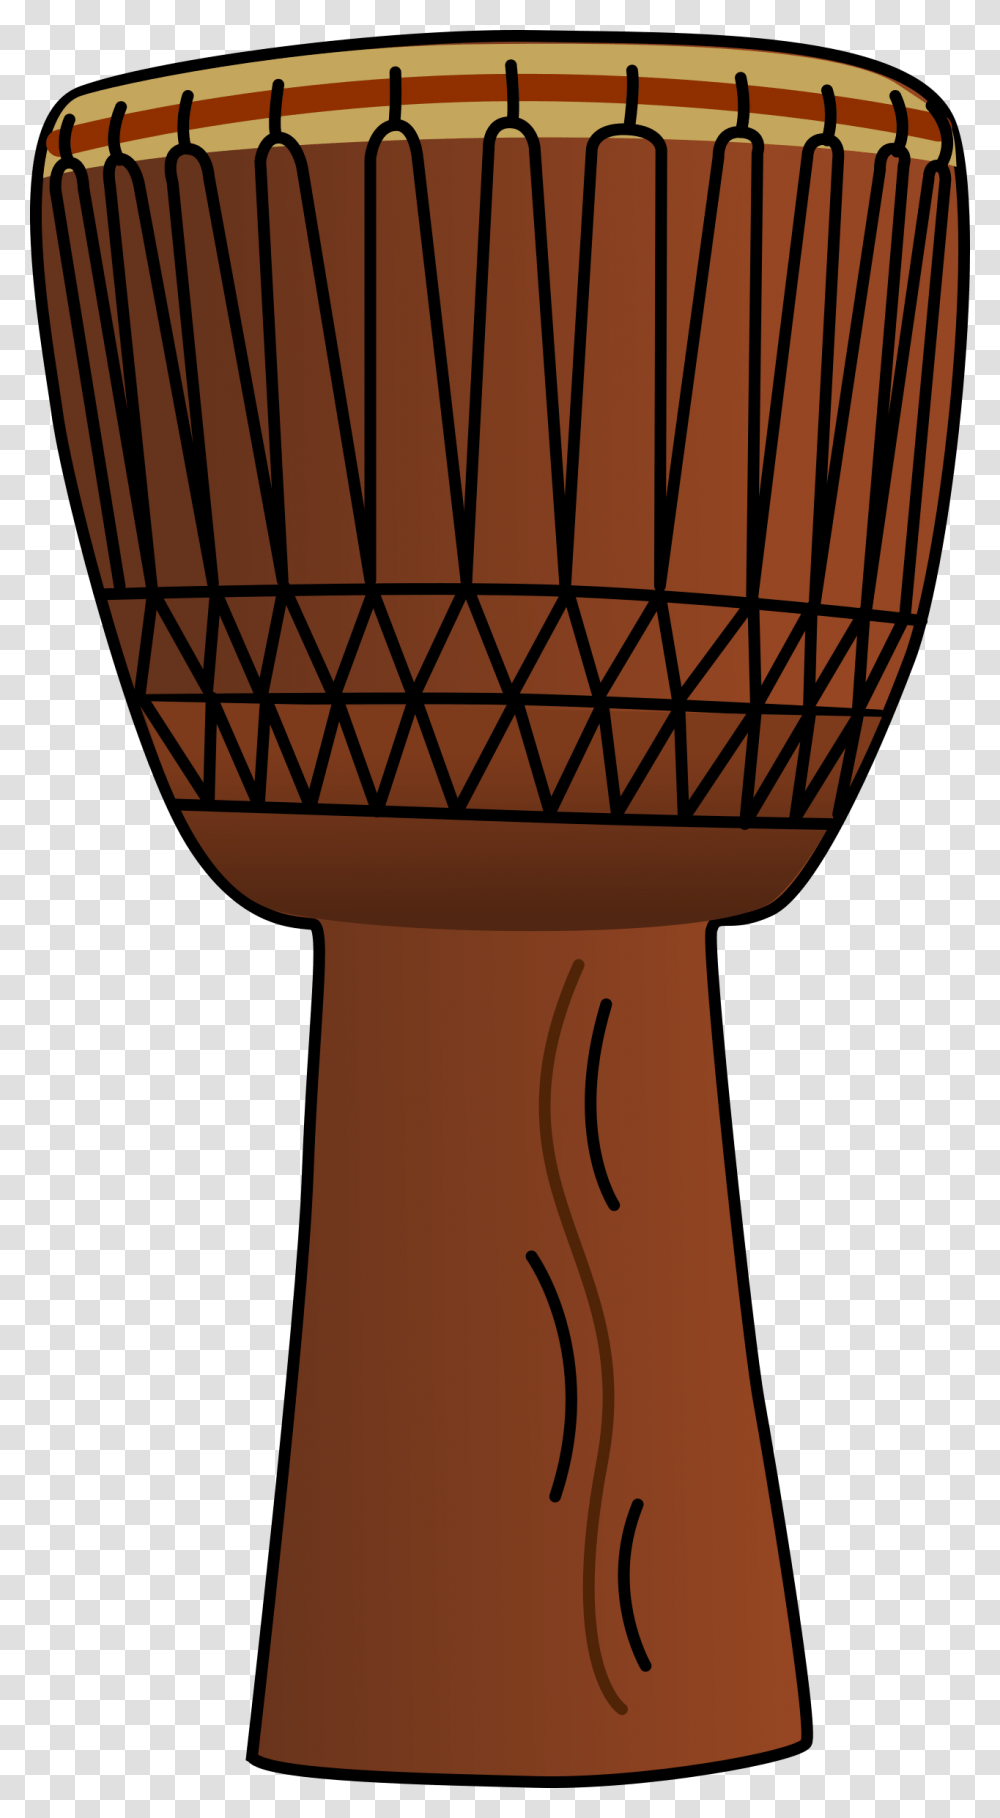 African Drum Big Image African Drum Icon, Percussion, Musical Instrument, Lamp Transparent Png